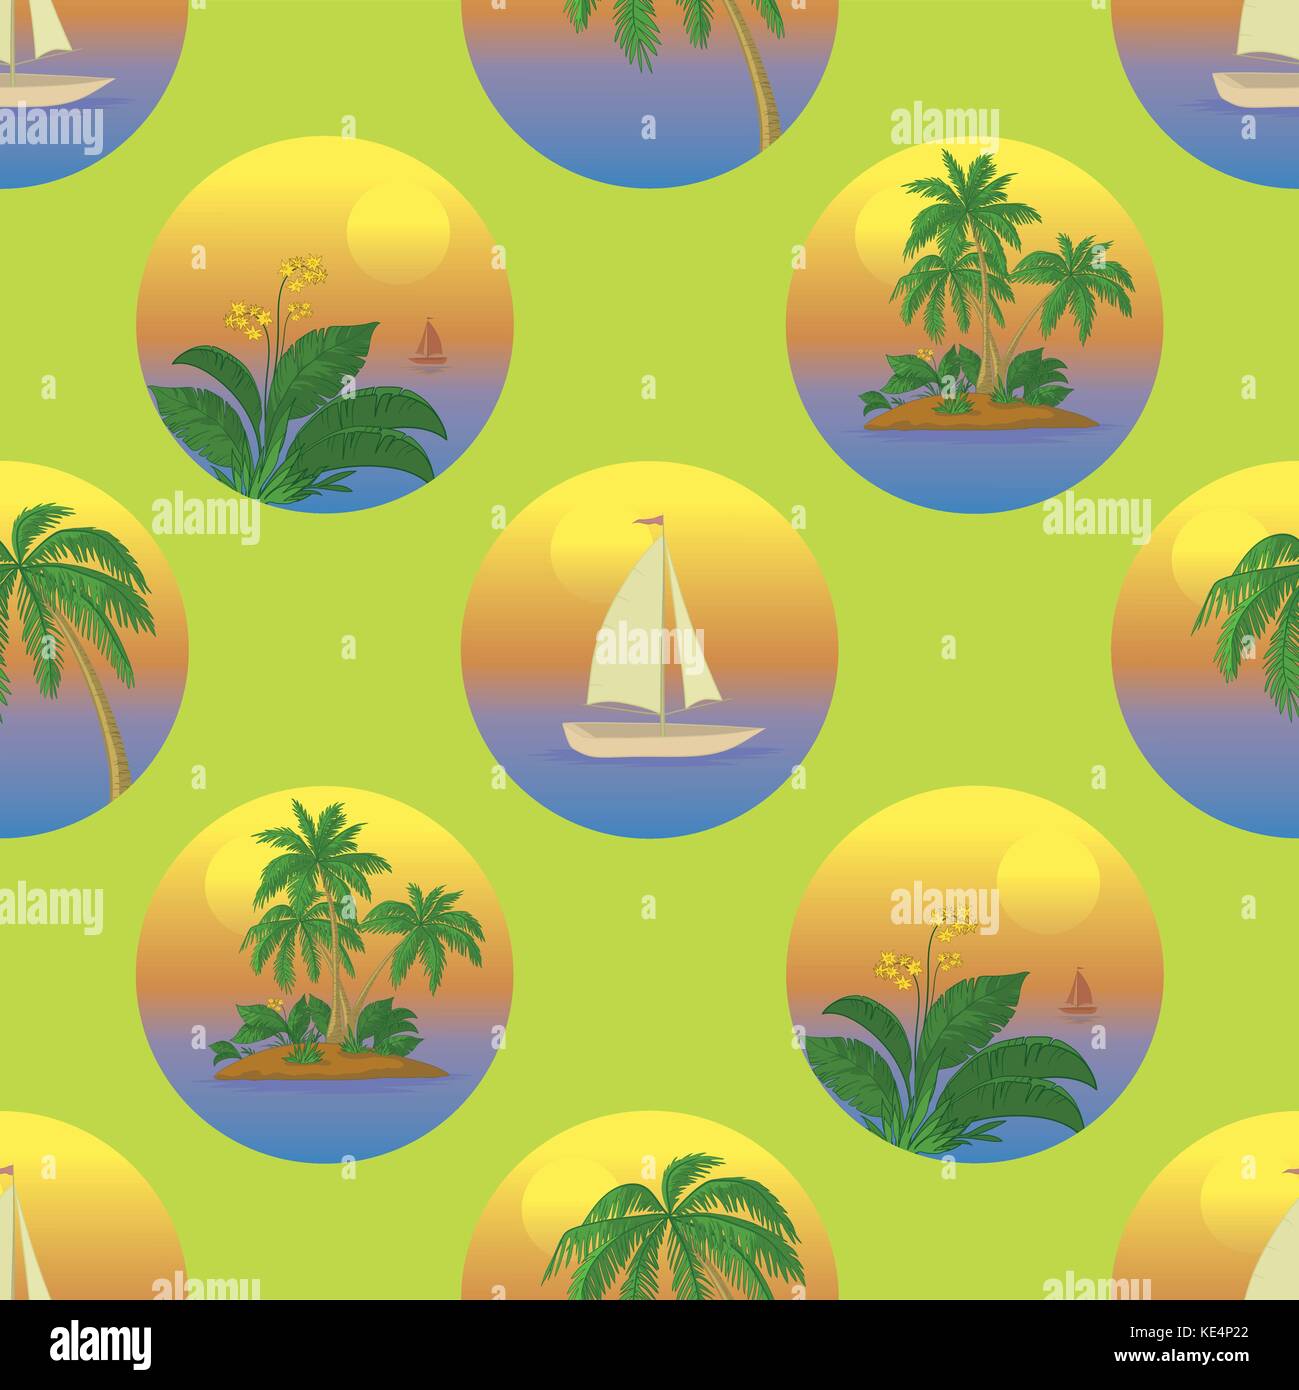 Seamless tropical background Stock Vector